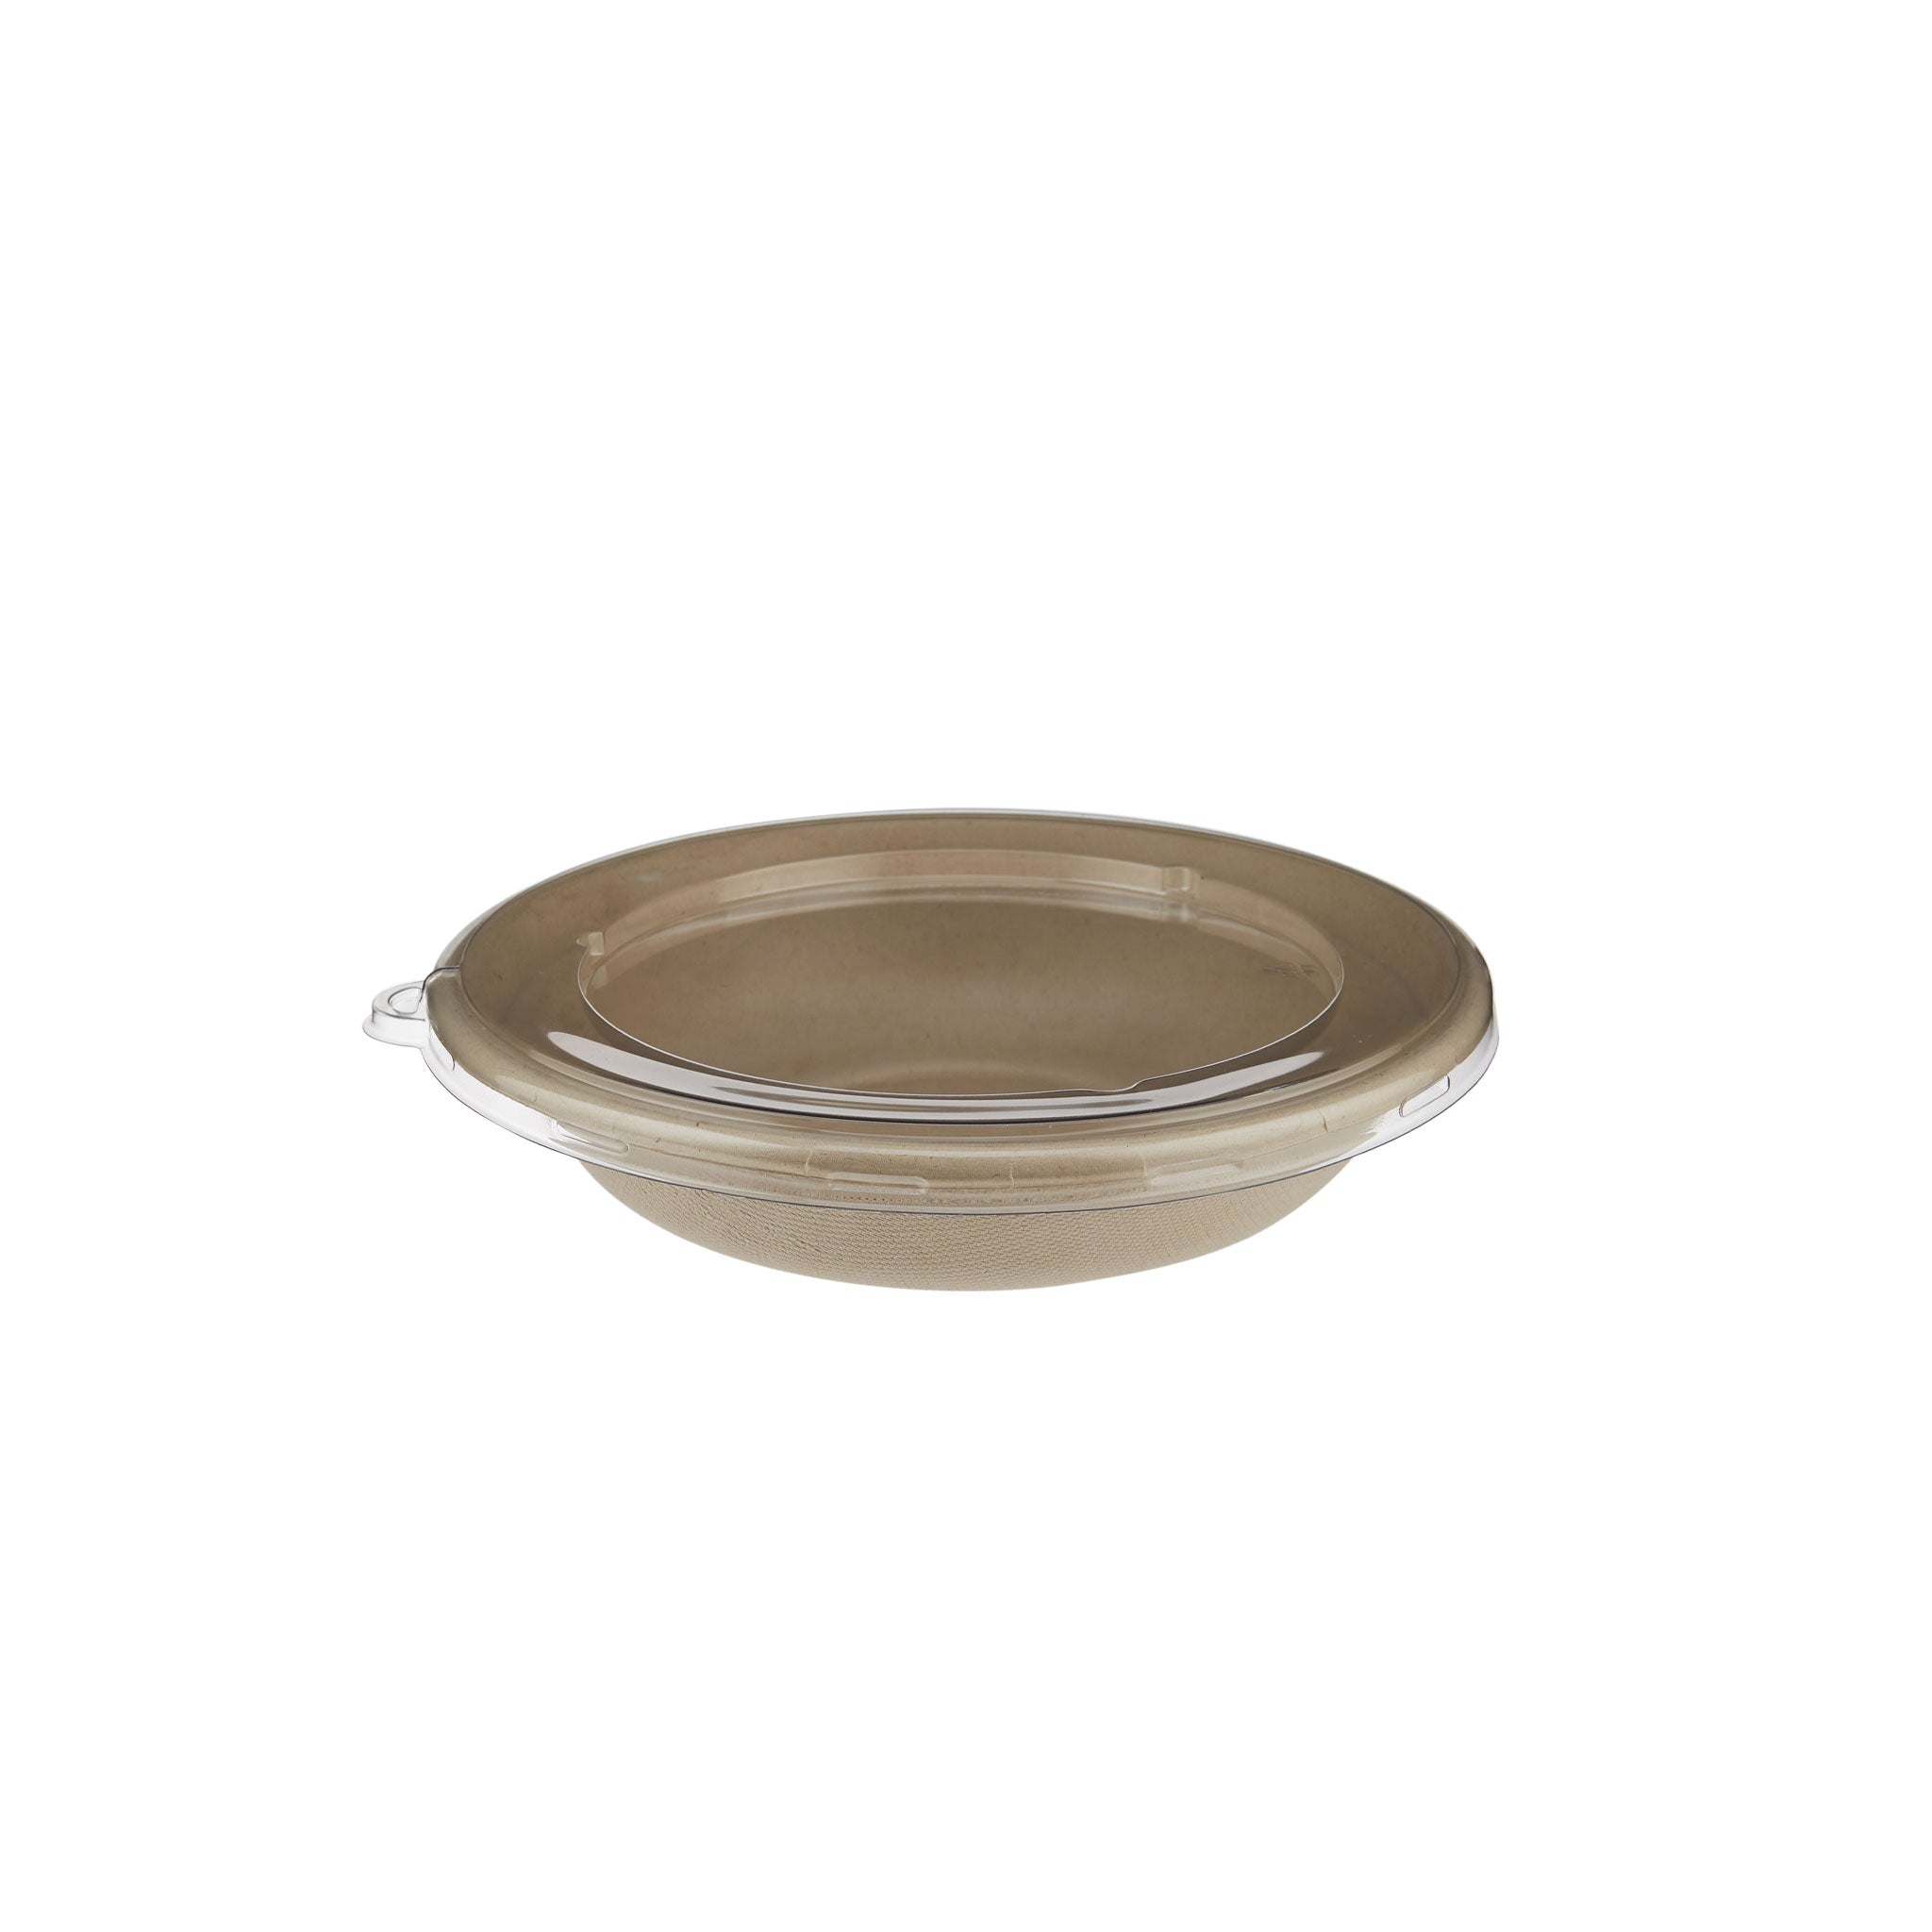 Eco-Friendly Round Bowl 24 Oz - 500 Pieces - Hotpack Global